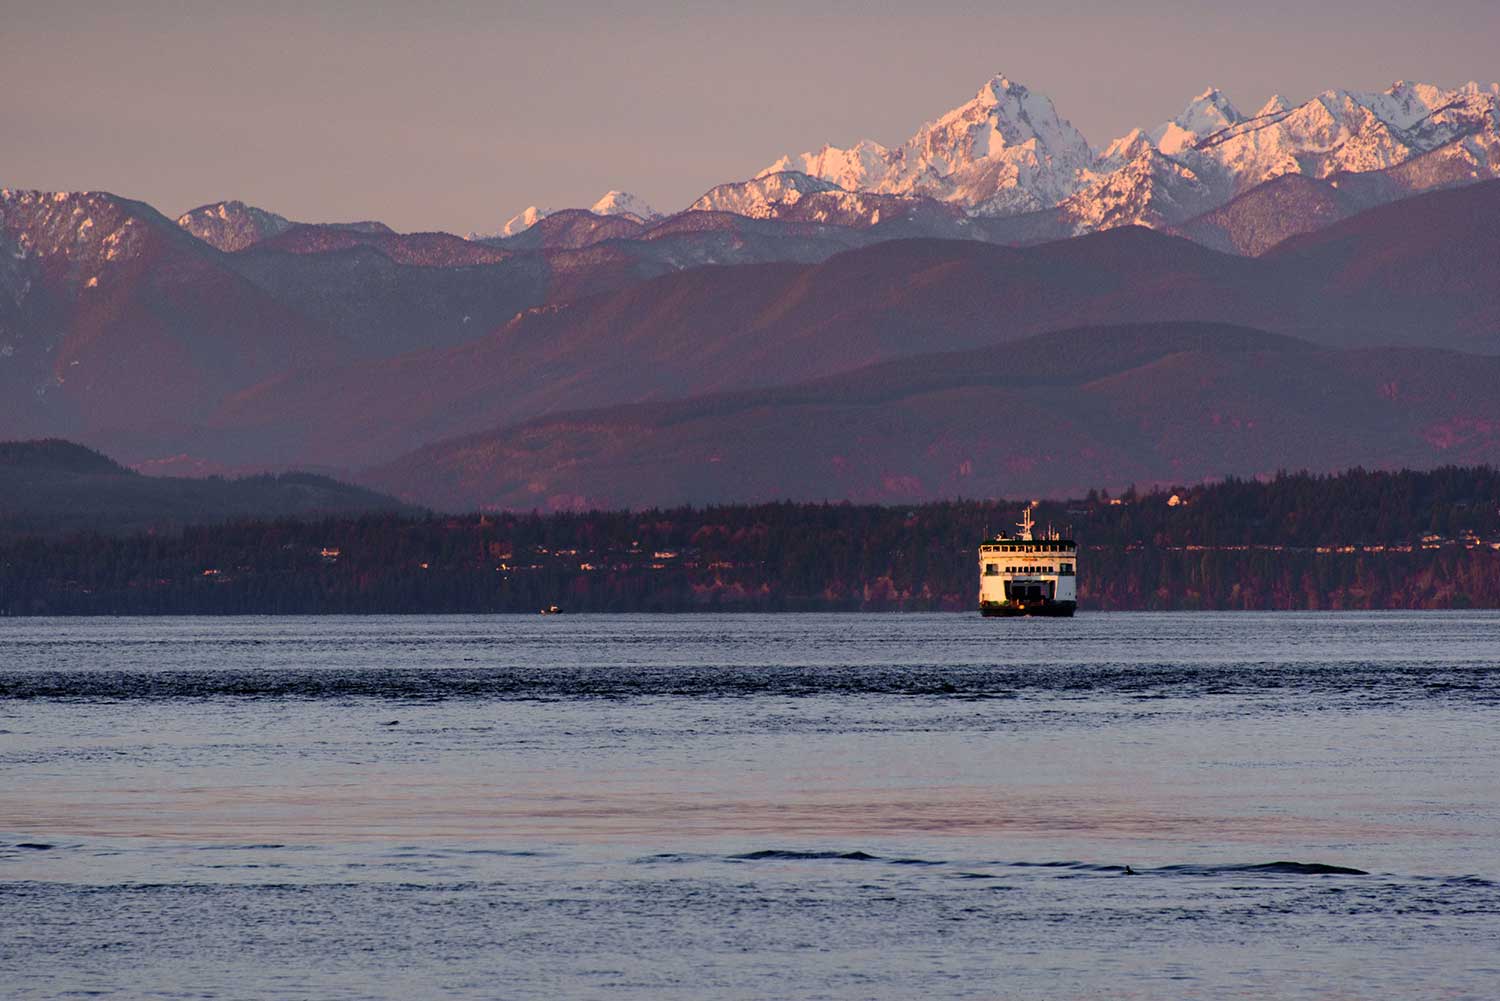 Snow-capped mountains in the background and a Washington State ferry in the foreground.